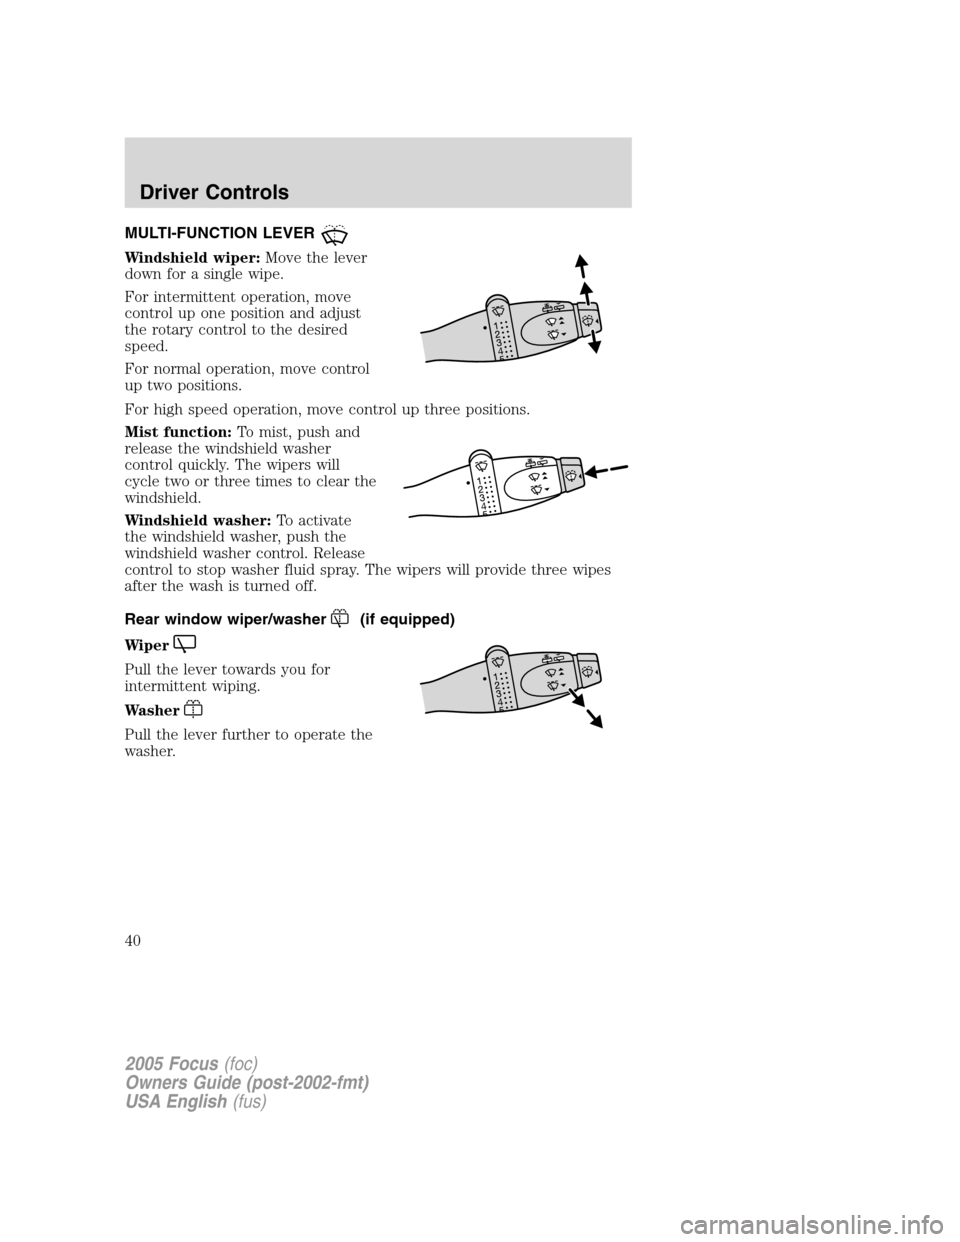 FORD FOCUS 2005 1.G Owners Guide MULTI-FUNCTION LEVER
Windshield wiper:Move the lever
down for a single wipe.
For intermittent operation, move
control up one position and adjust
the rotary control to the desired
speed.
For normal ope